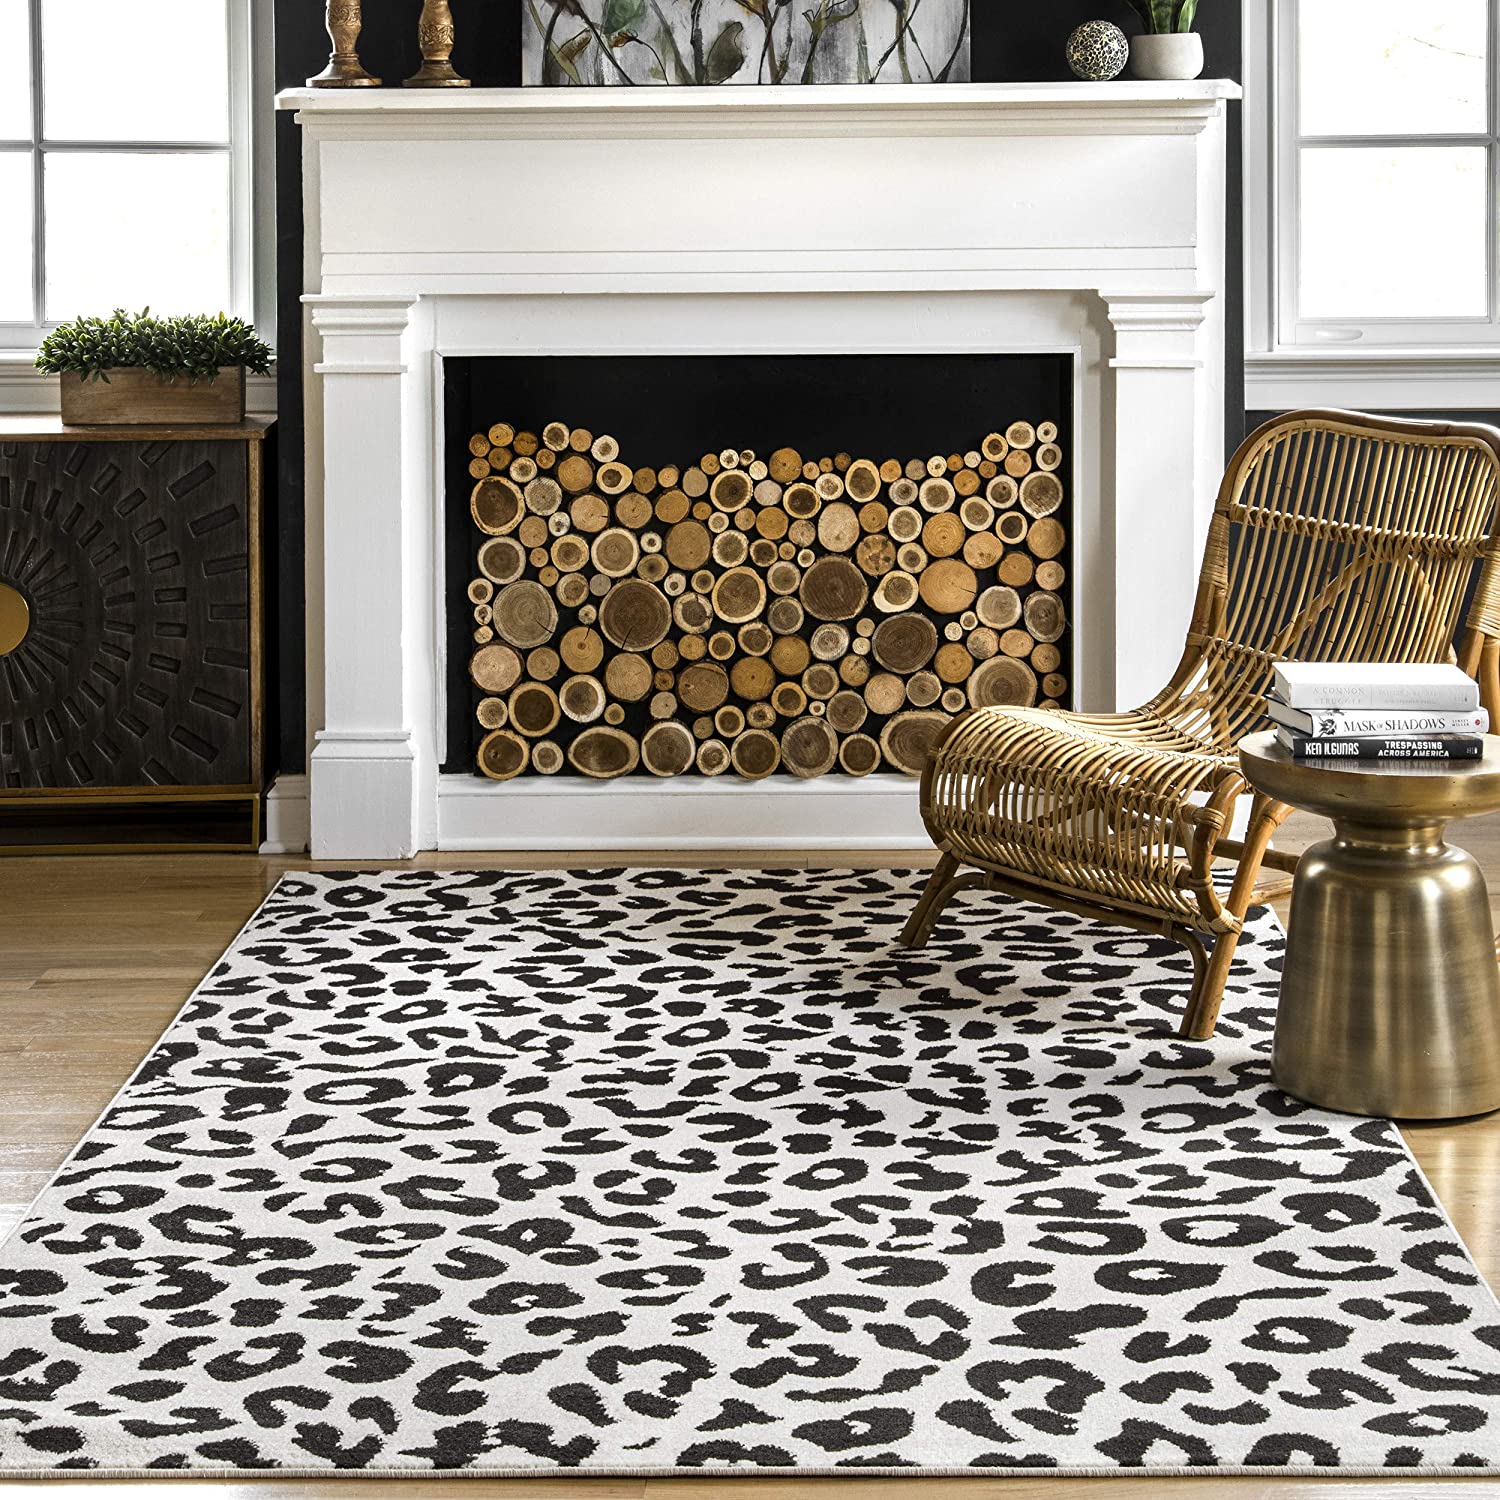 Ultra Soft Indoor Area Rug Runner Blue Leopard Print and Gold Texture Fluffy Area Rugs for Living Room Small Carpets for Home Decor Bathroom Play Room Children Nursery Rug 2x3 Feet 